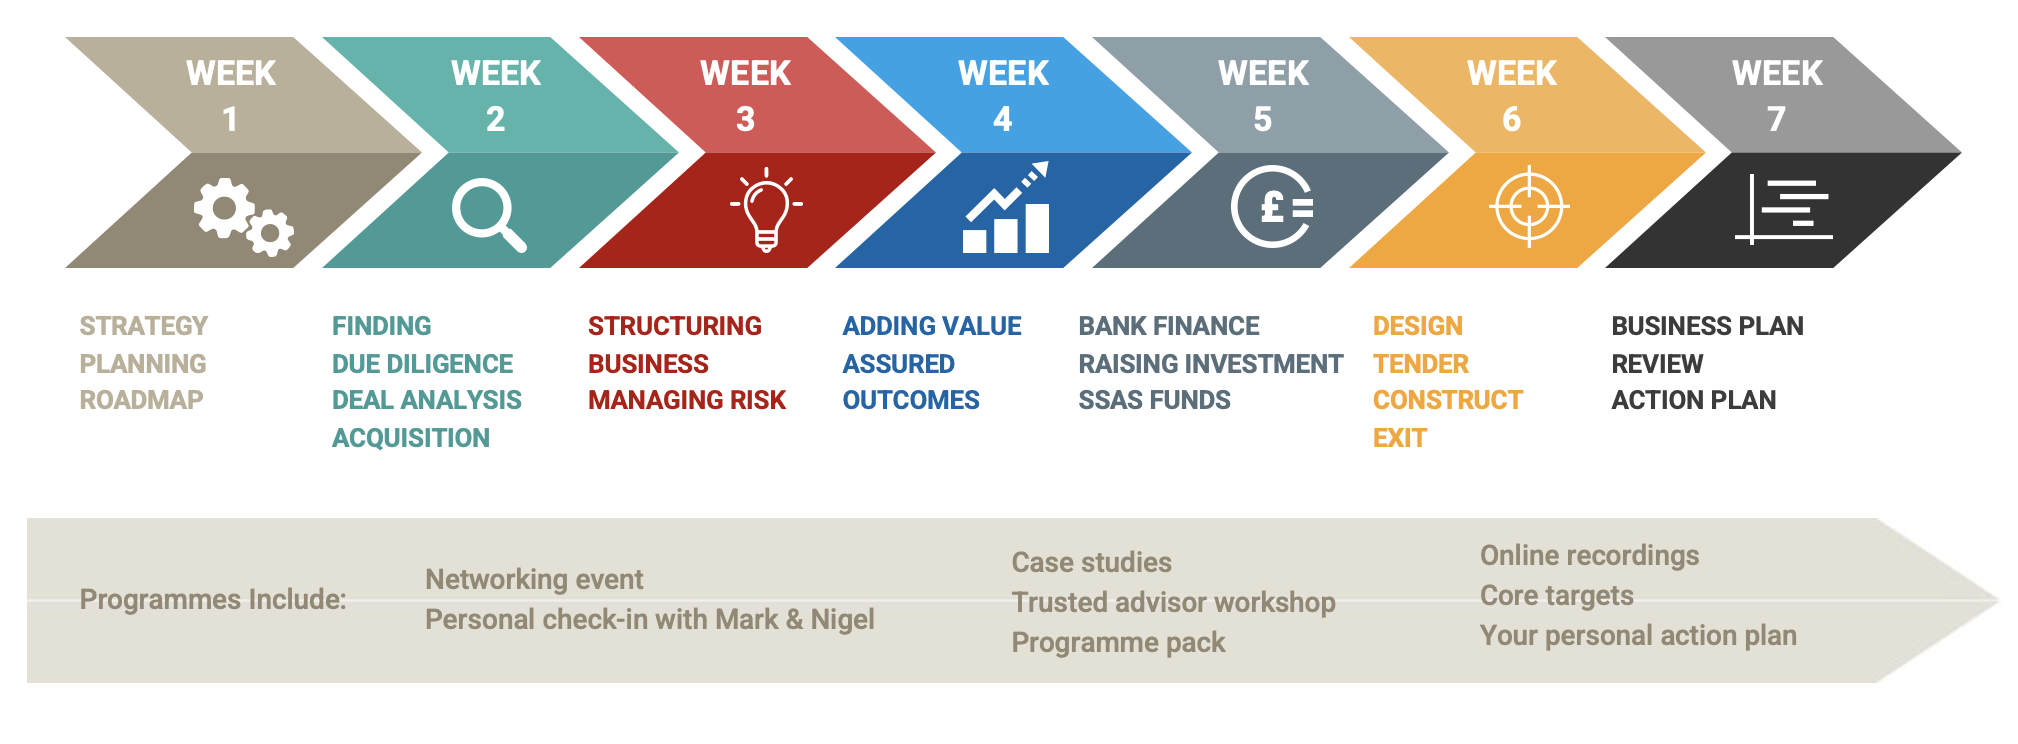 13 Week Property Investment Course Schedule